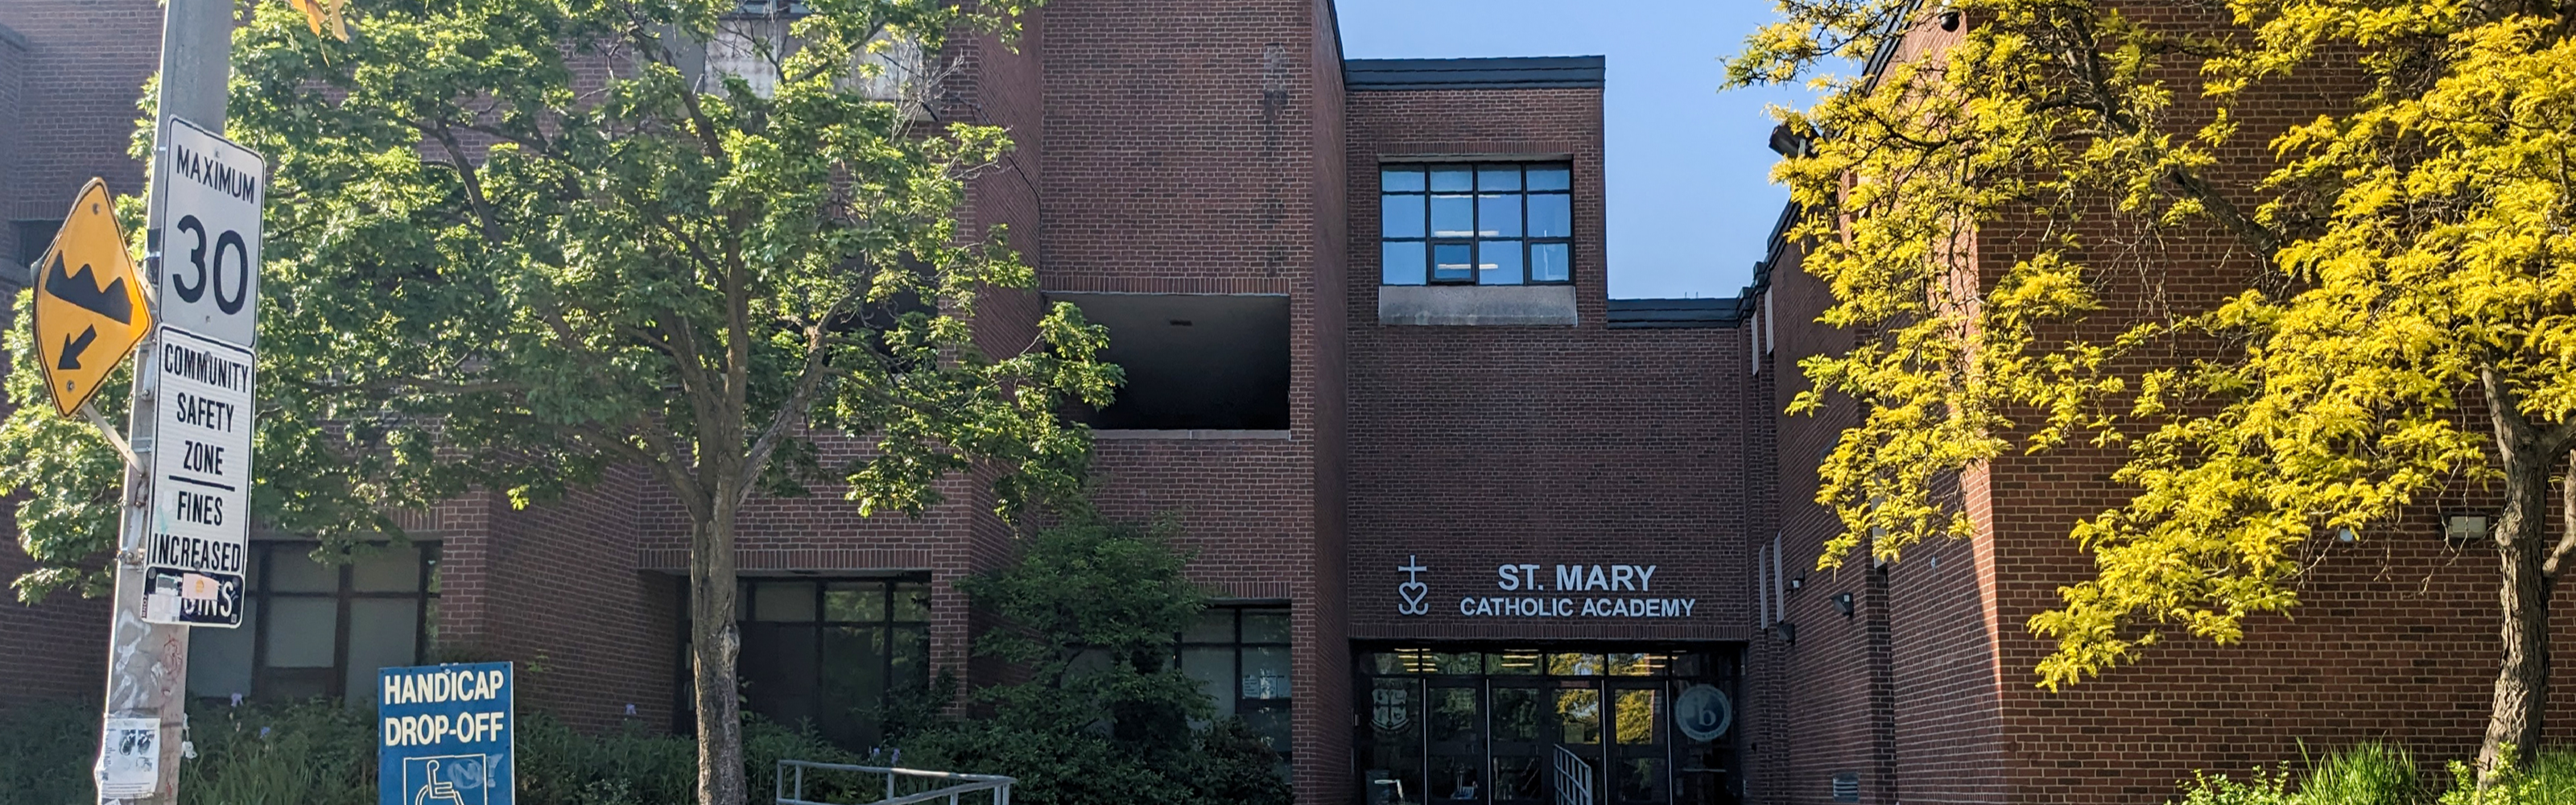 The front of the St. Mary Catholic Academy school building